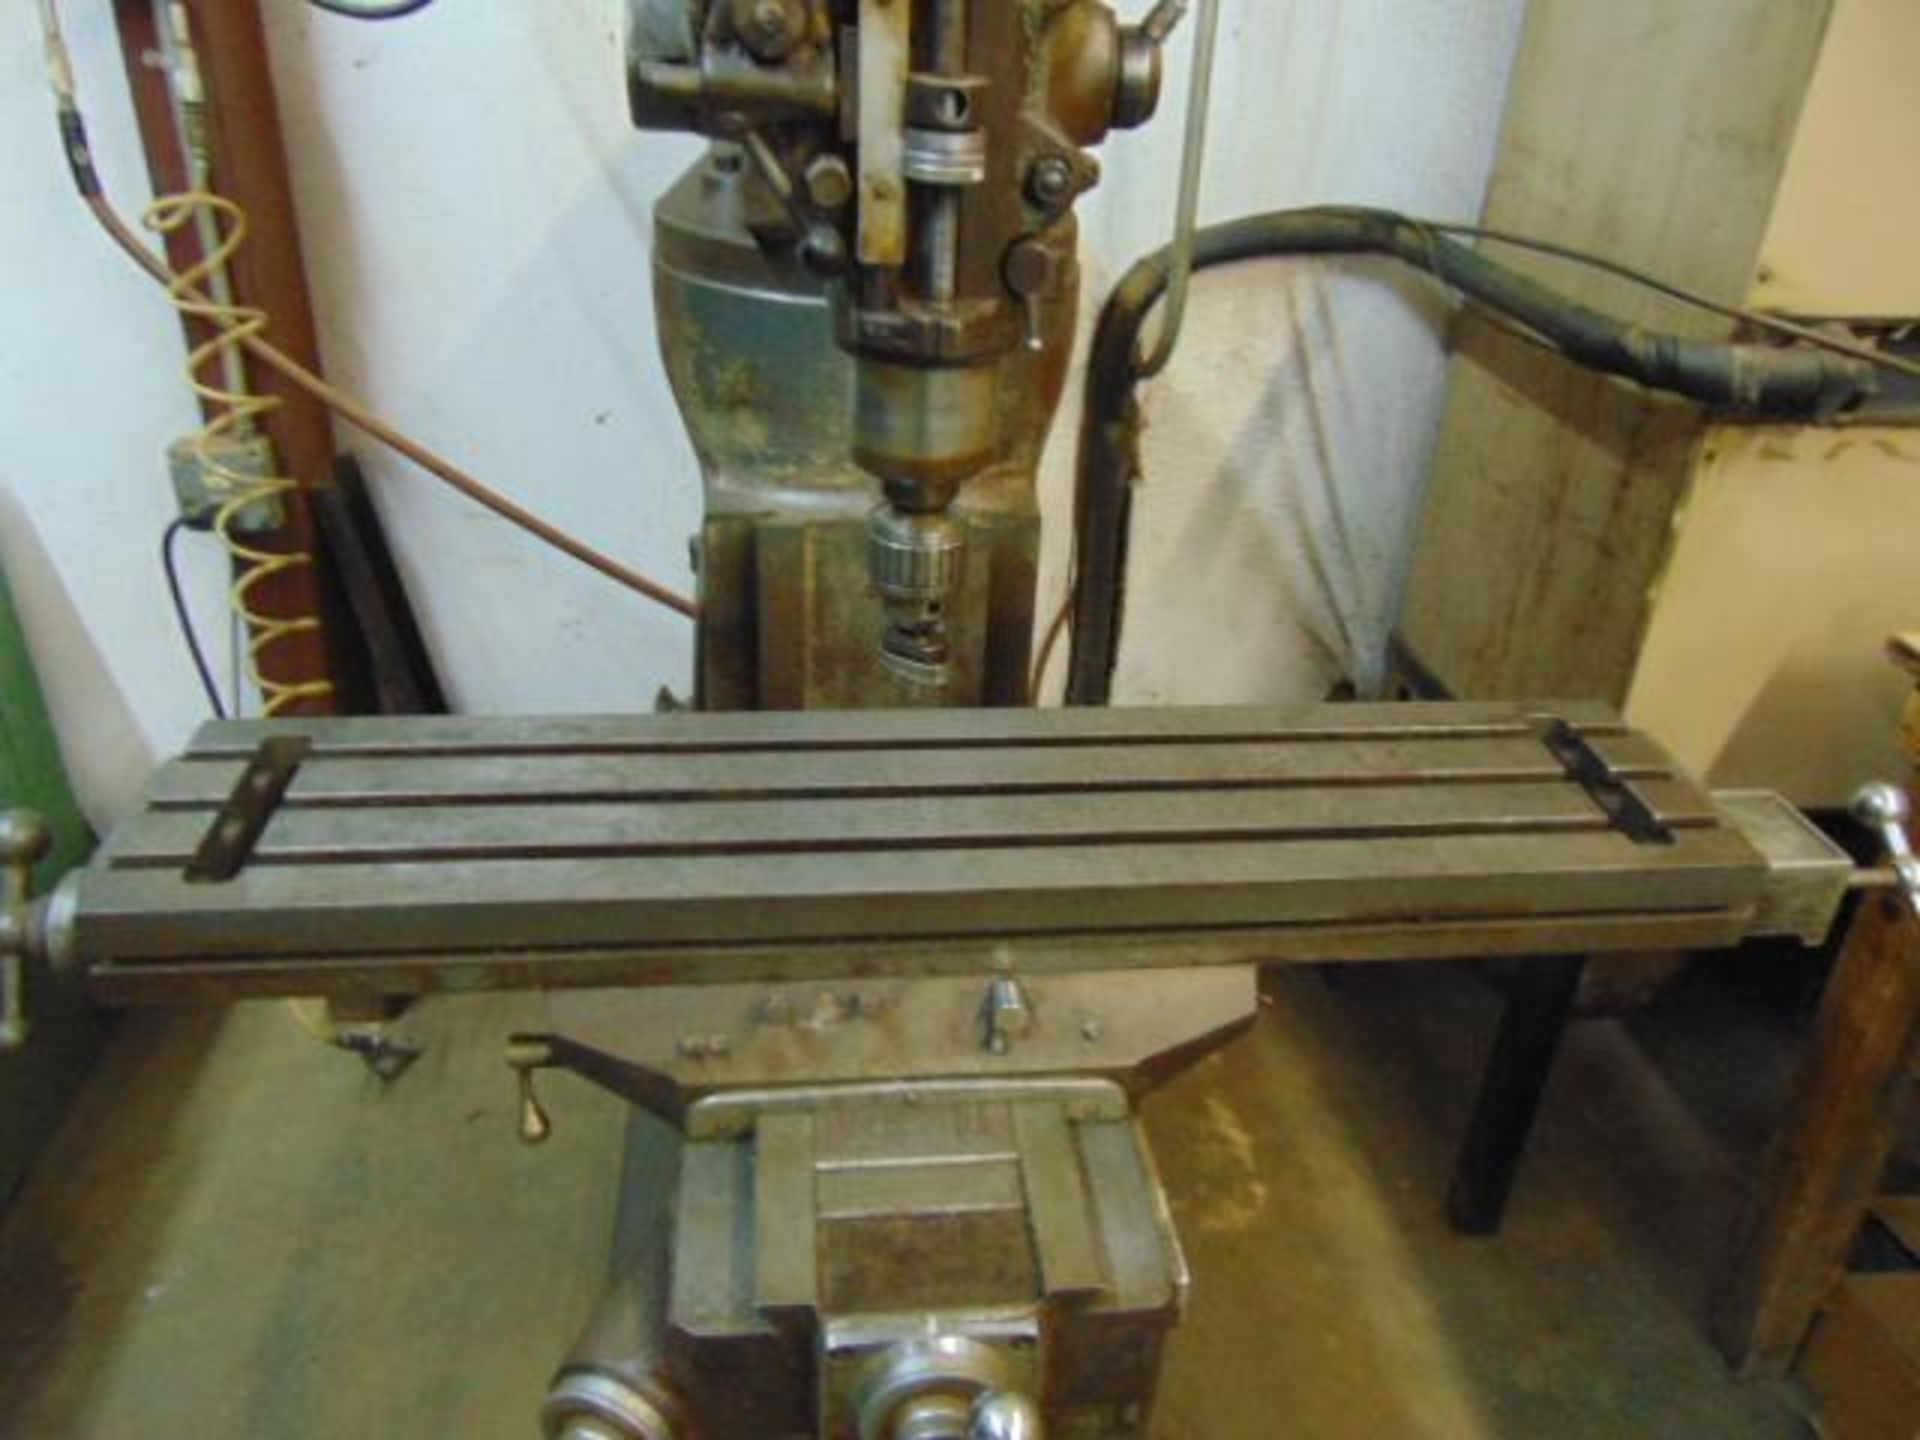 VERTICAL TURRET MILL, BRIDGEPORT STEP PULLEY MACHINE, 9" x 42" tbl., S/N 86975 - Image 3 of 5